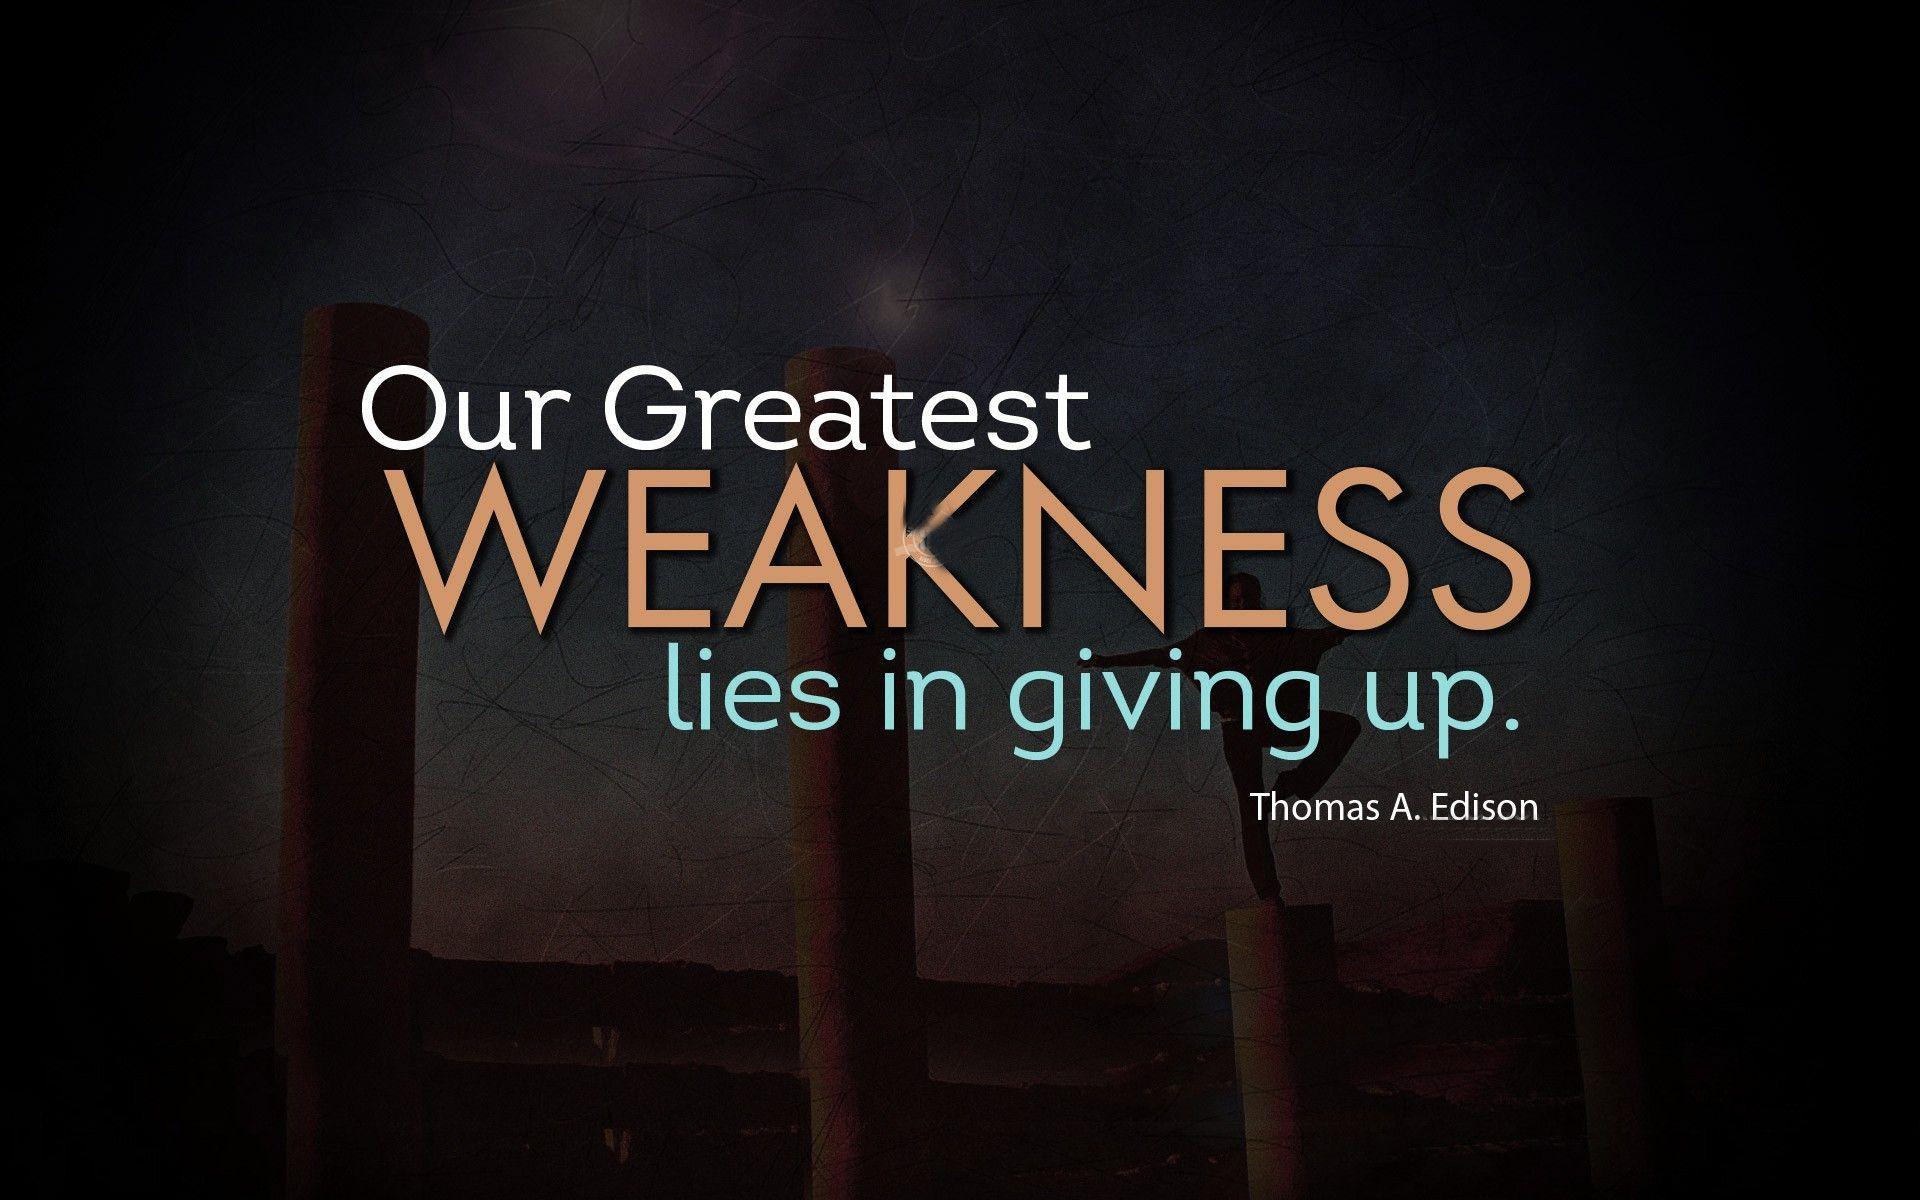 Thomas Edison Quotes About Greatest Weakness image pics